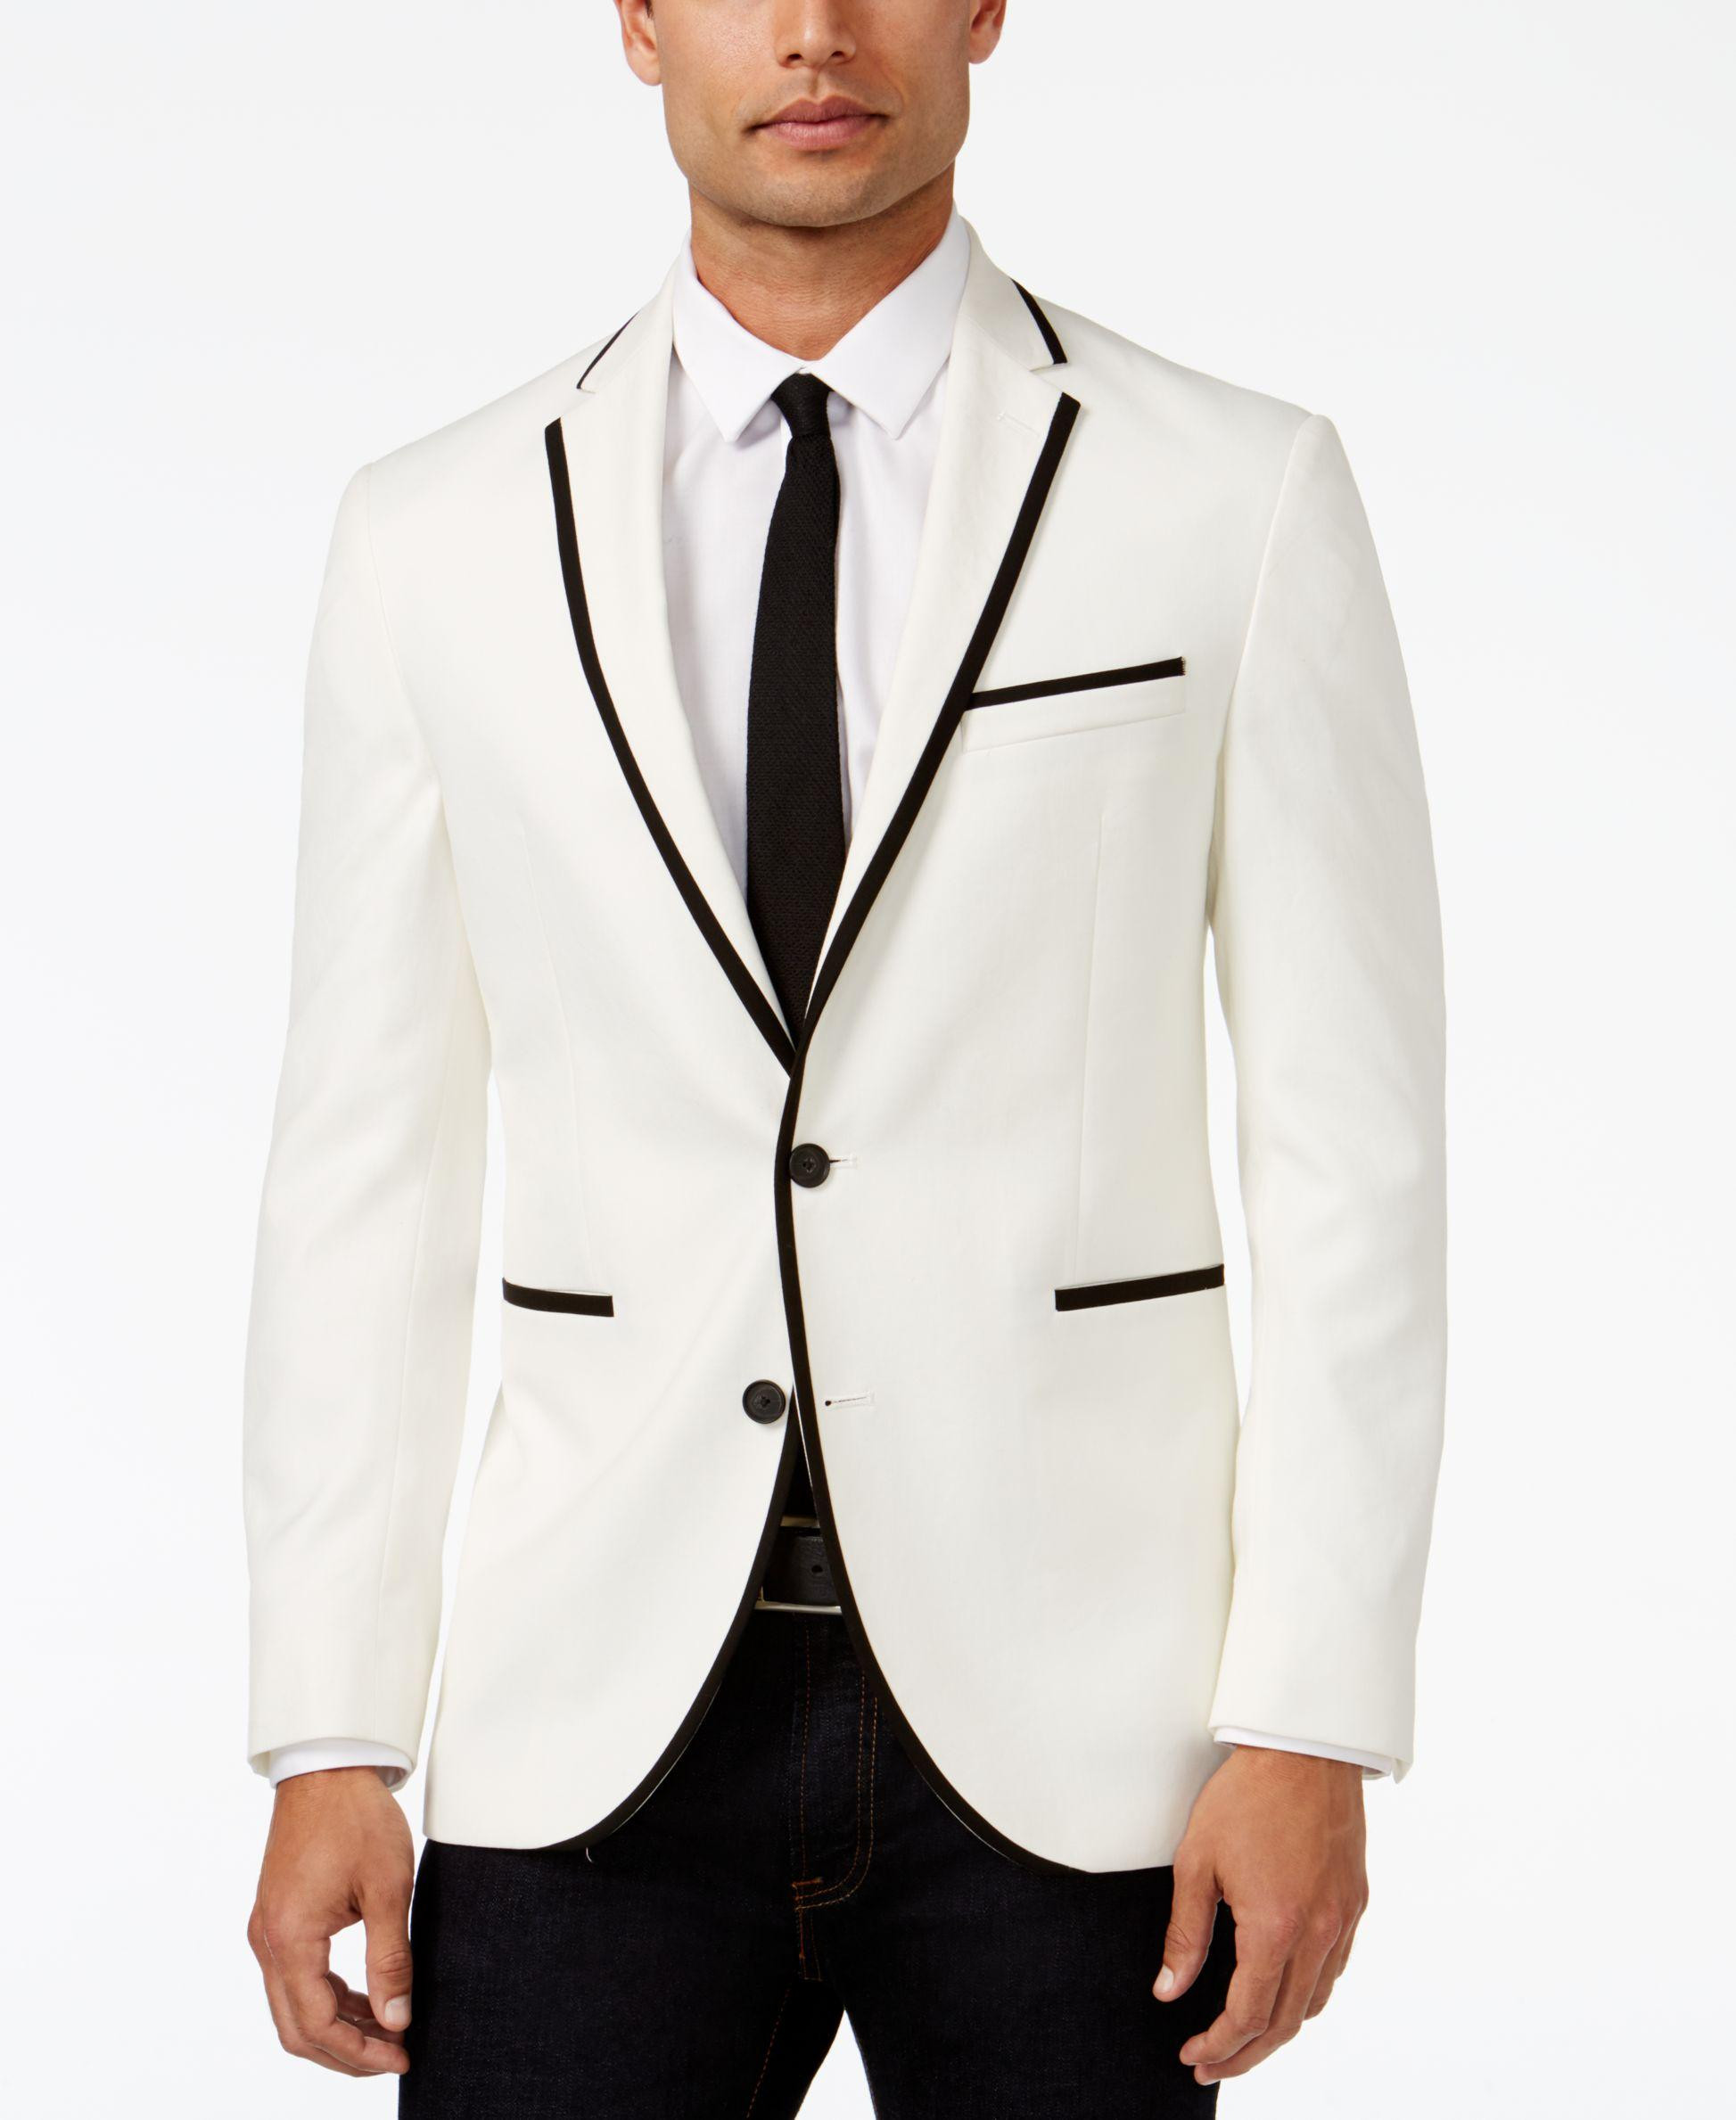 Mens White Dinner Jacket
 Kenneth cole Classic fit White With Black Slim Dinner